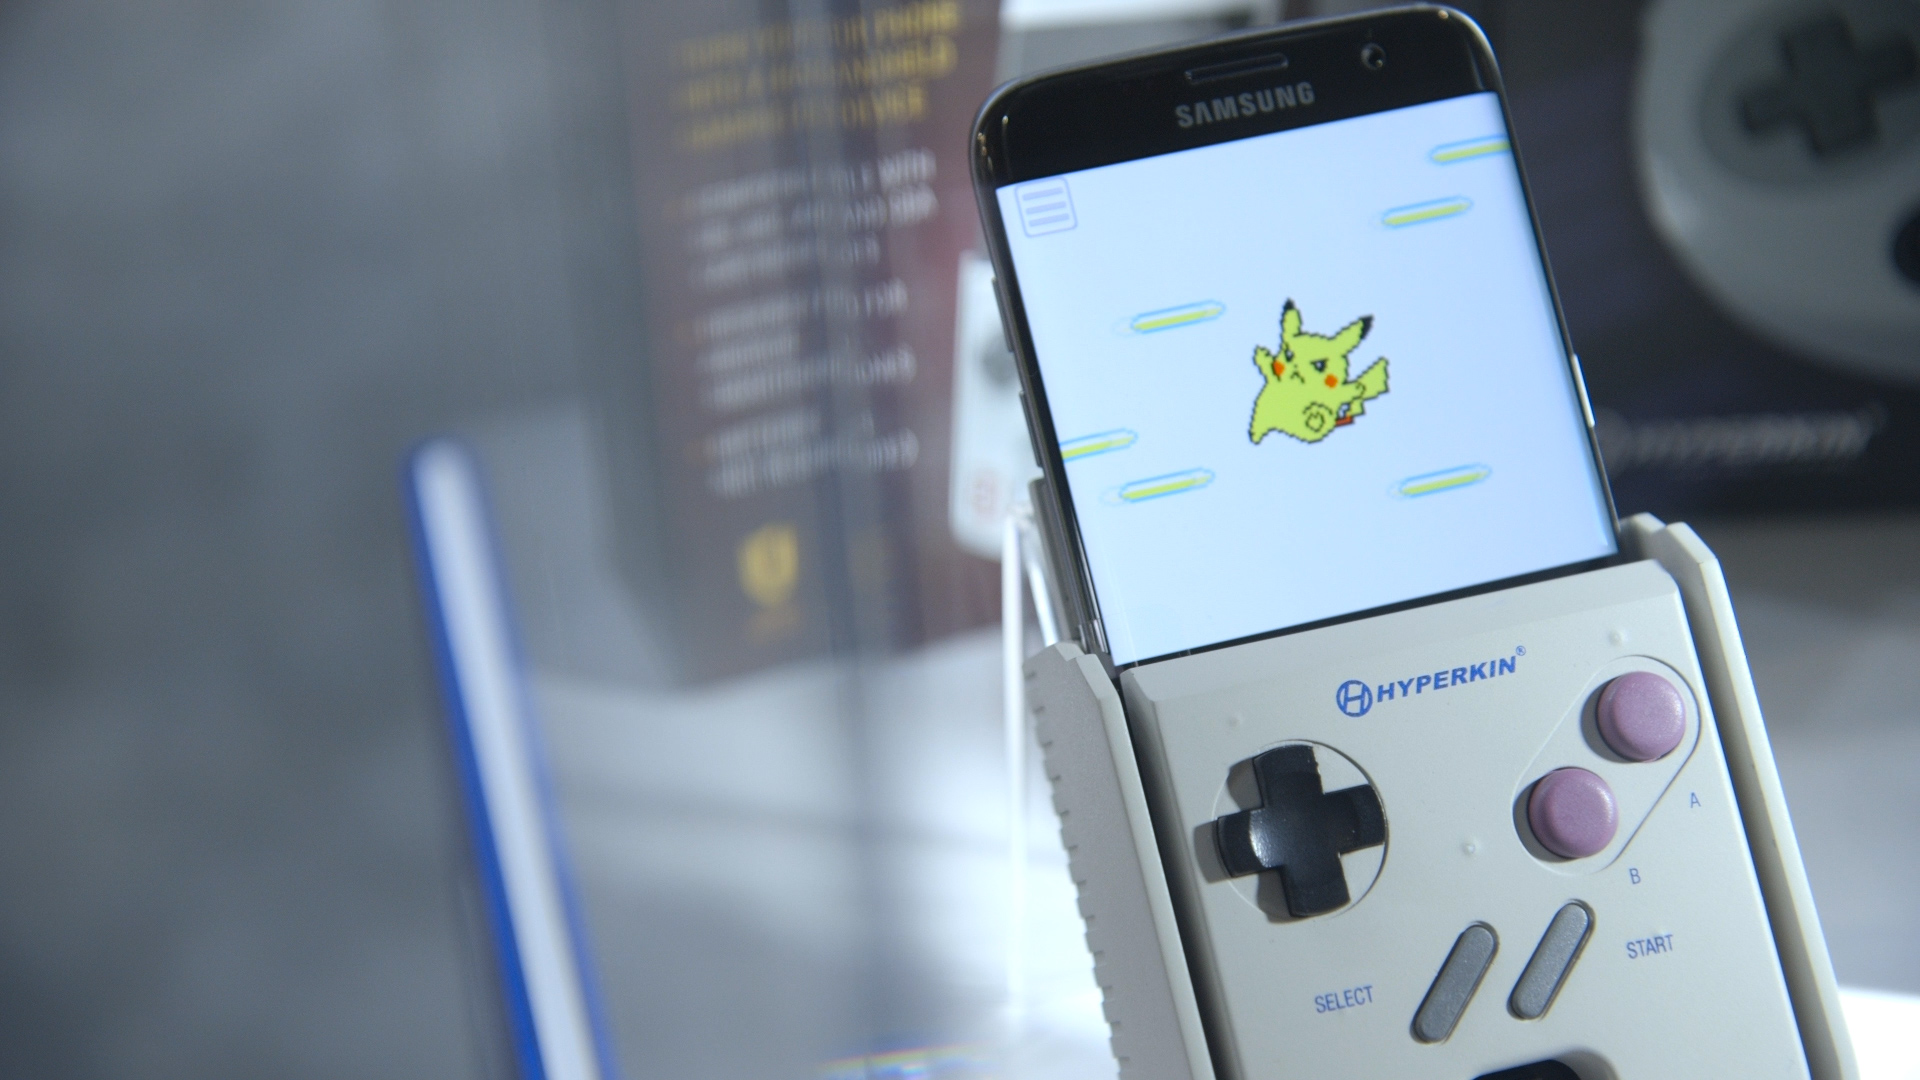 Party like it's 1989: Super Retro Boy resurrects the Game Boy